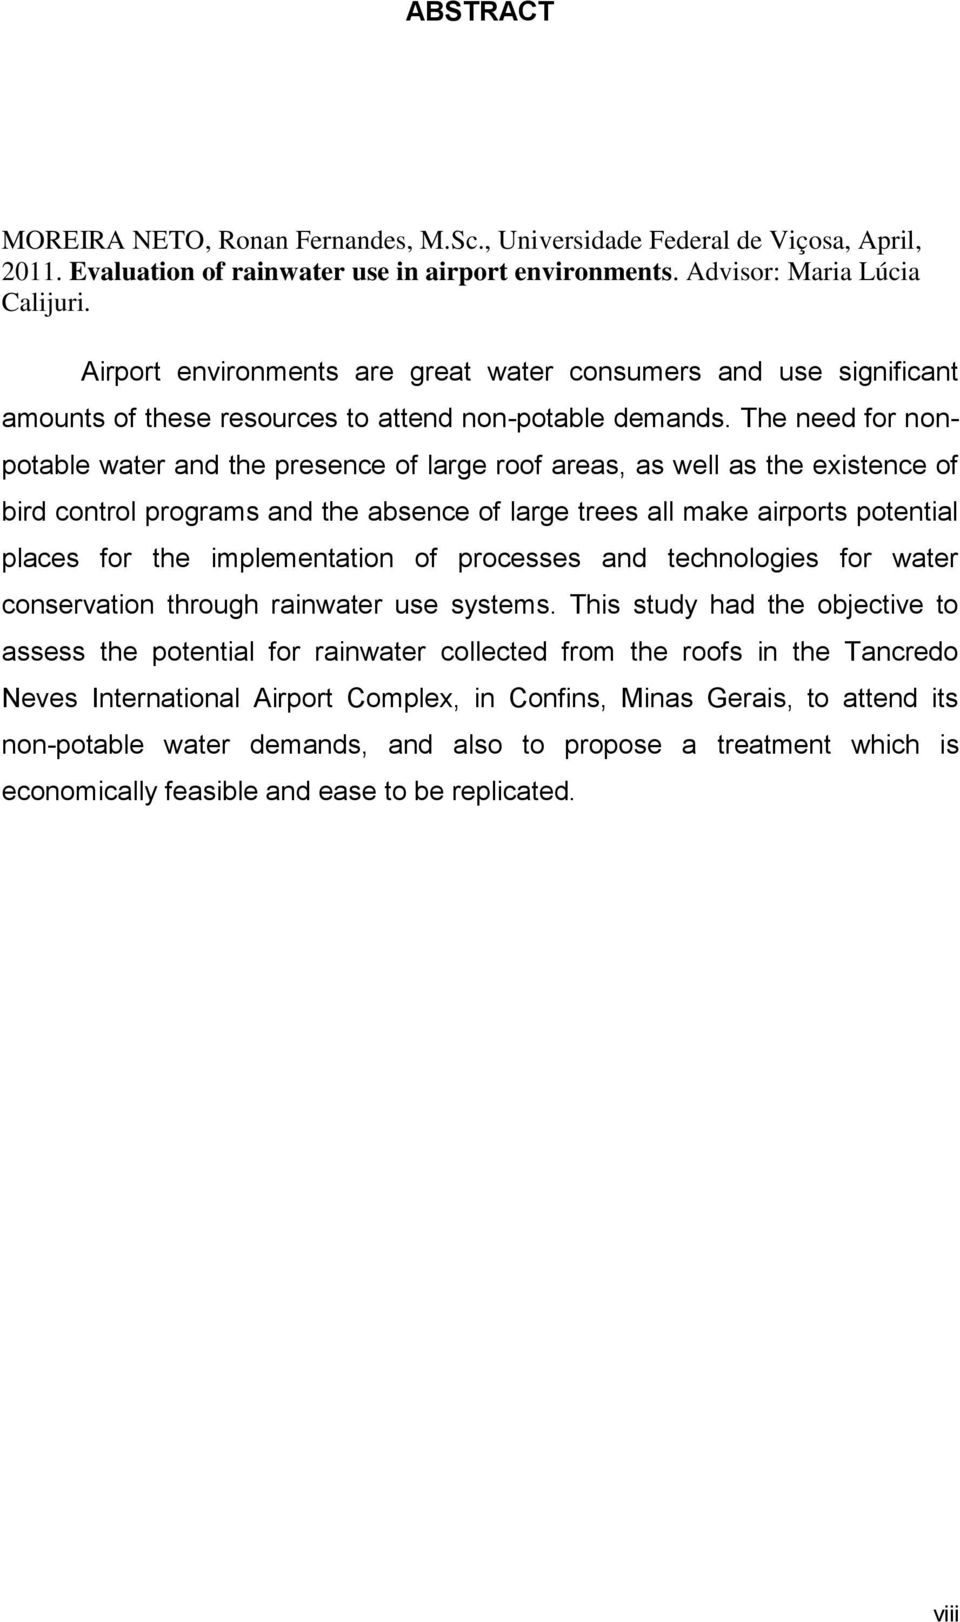 The need for nonpotable water and the presence of large roof areas, as well as the existence of bird control programs and the absence of large trees all make airports potential places for the